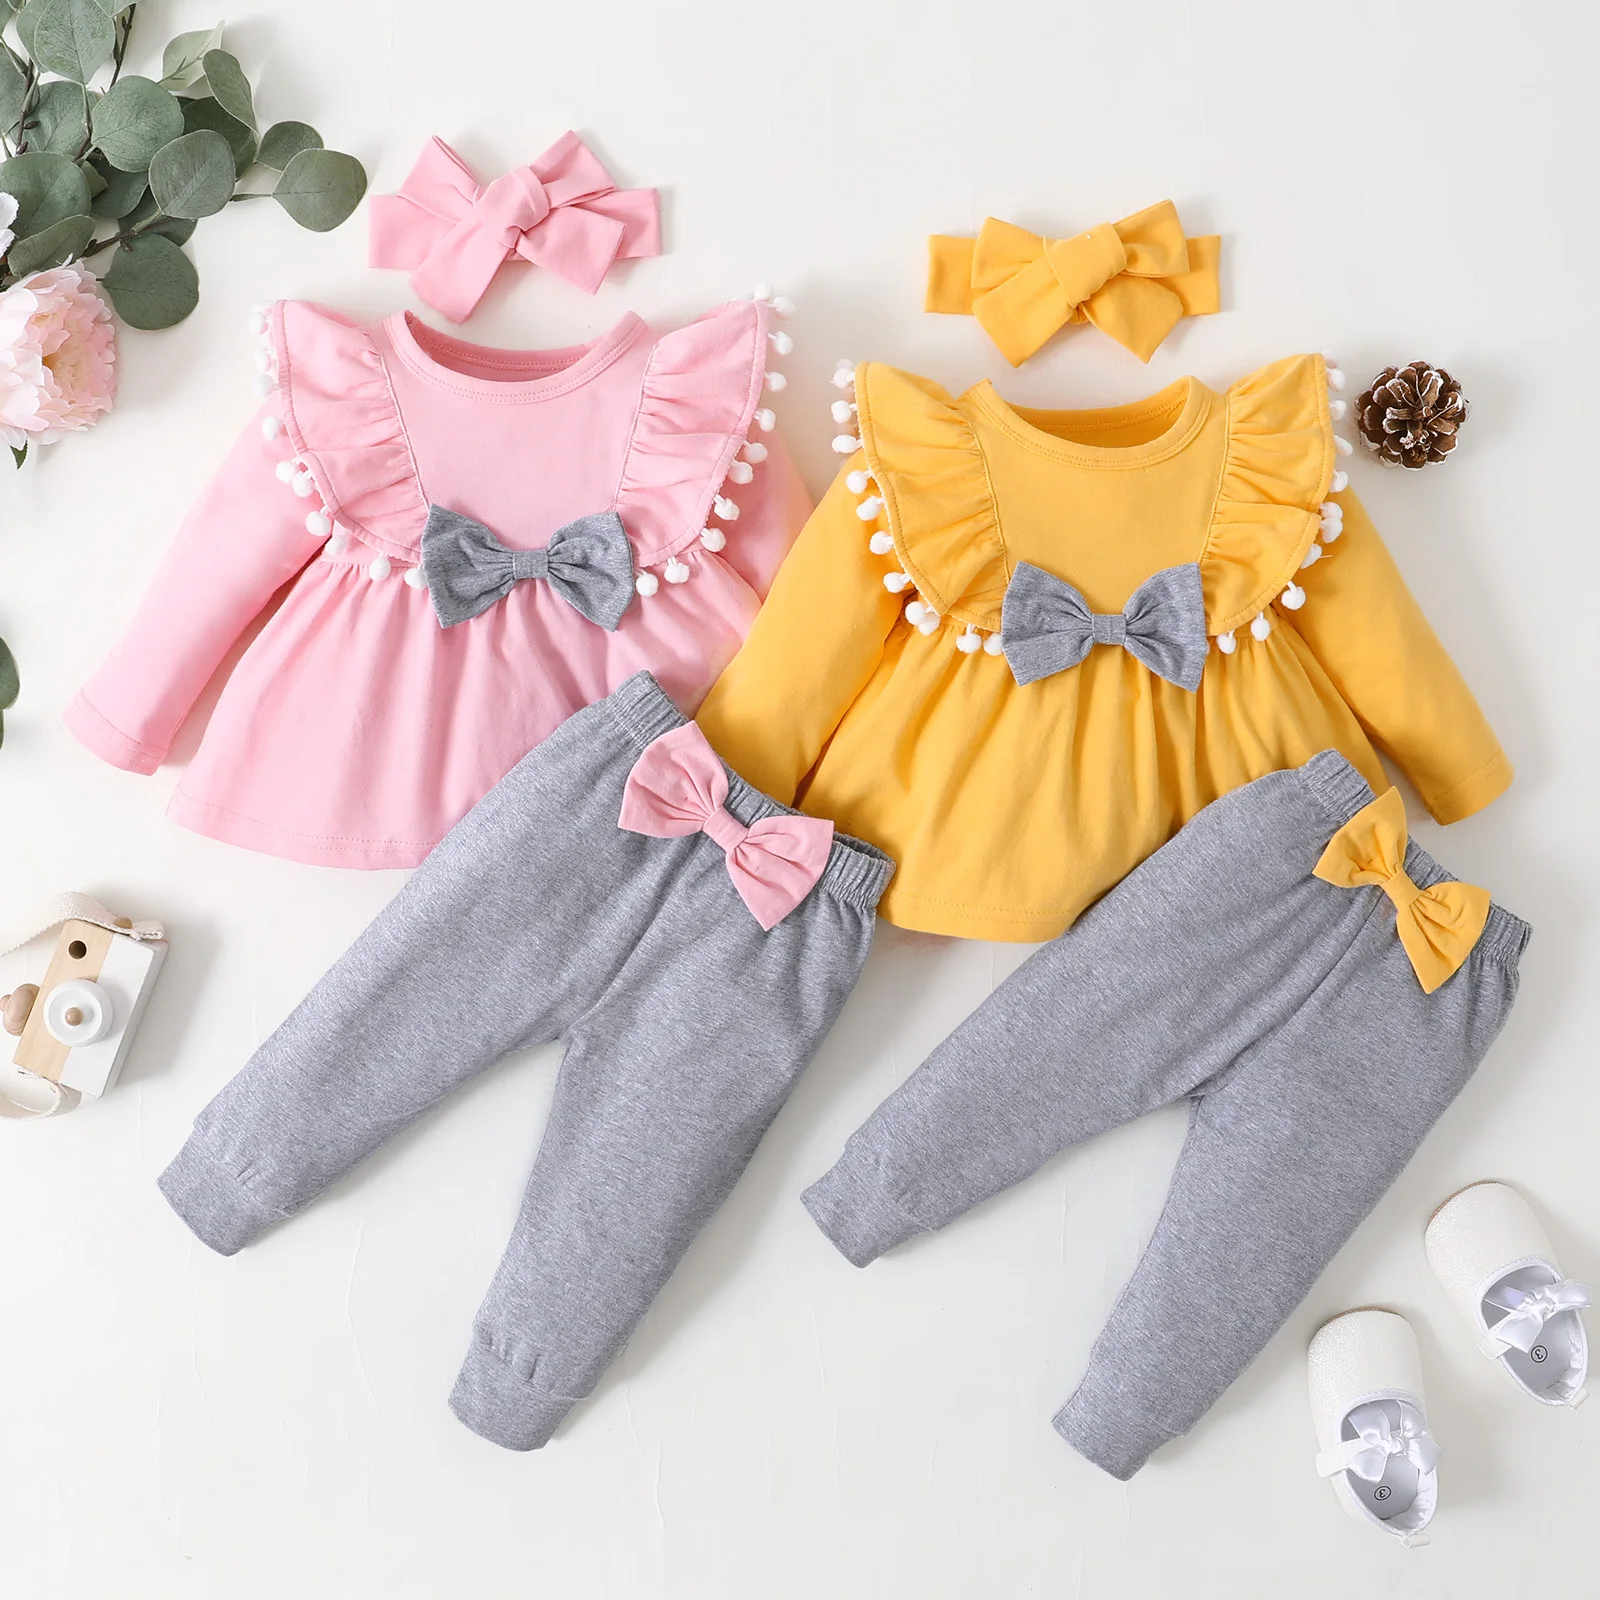 Newborn Baby Girl Clothes Set Toddler Girl Outfits Fashion Big Bow Top + Pants Whole Sale Kids Girls Clothes Outfits 3 Months